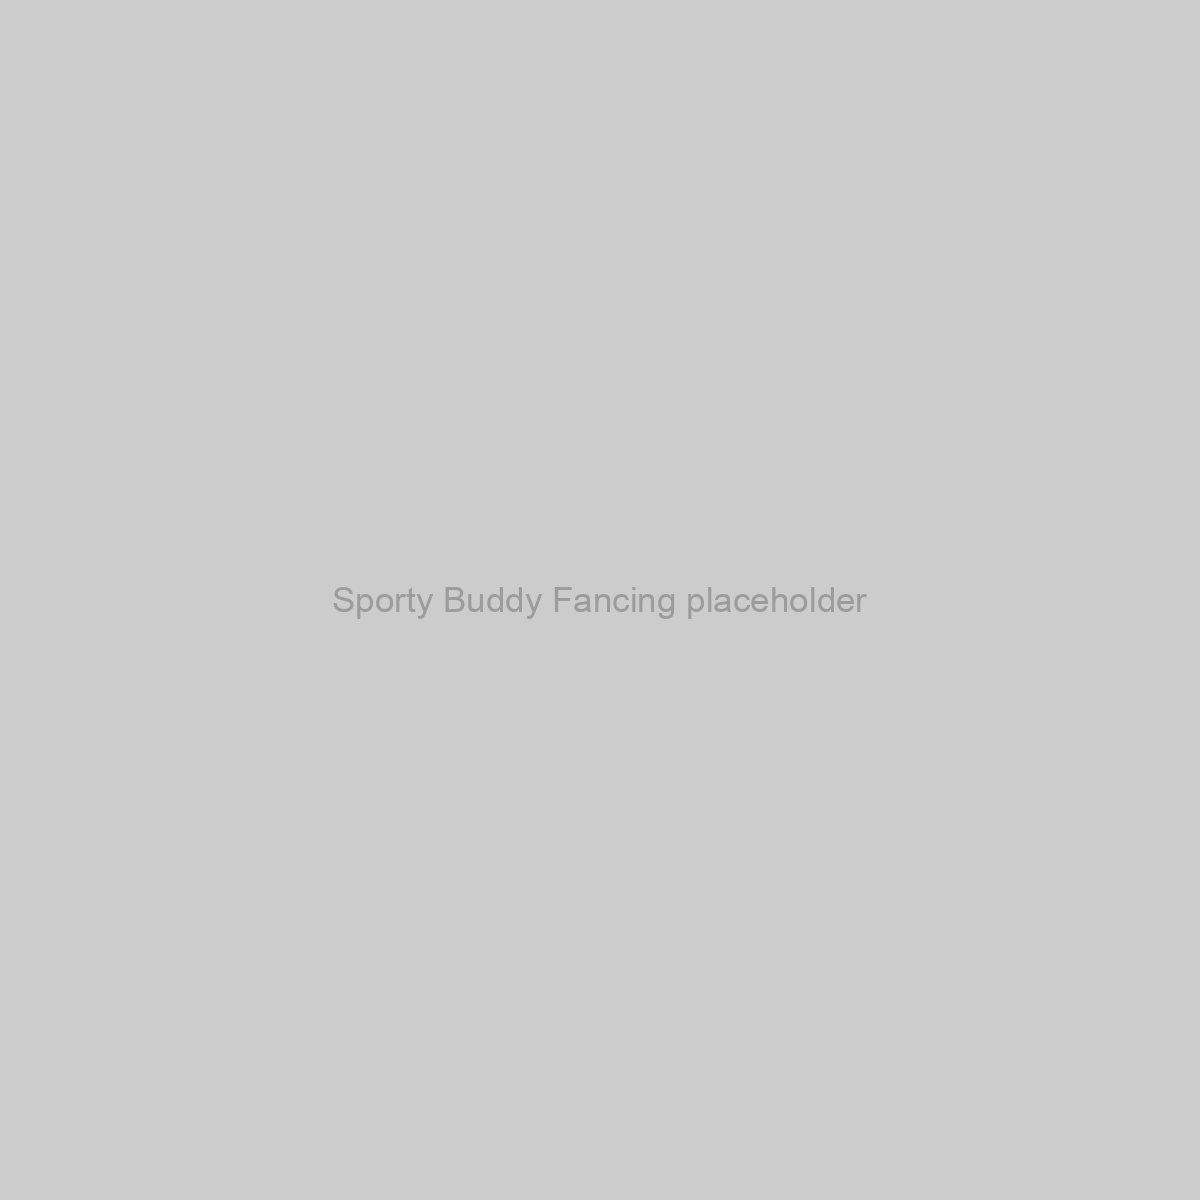 Sporty Buddy Fancing Placeholder Image